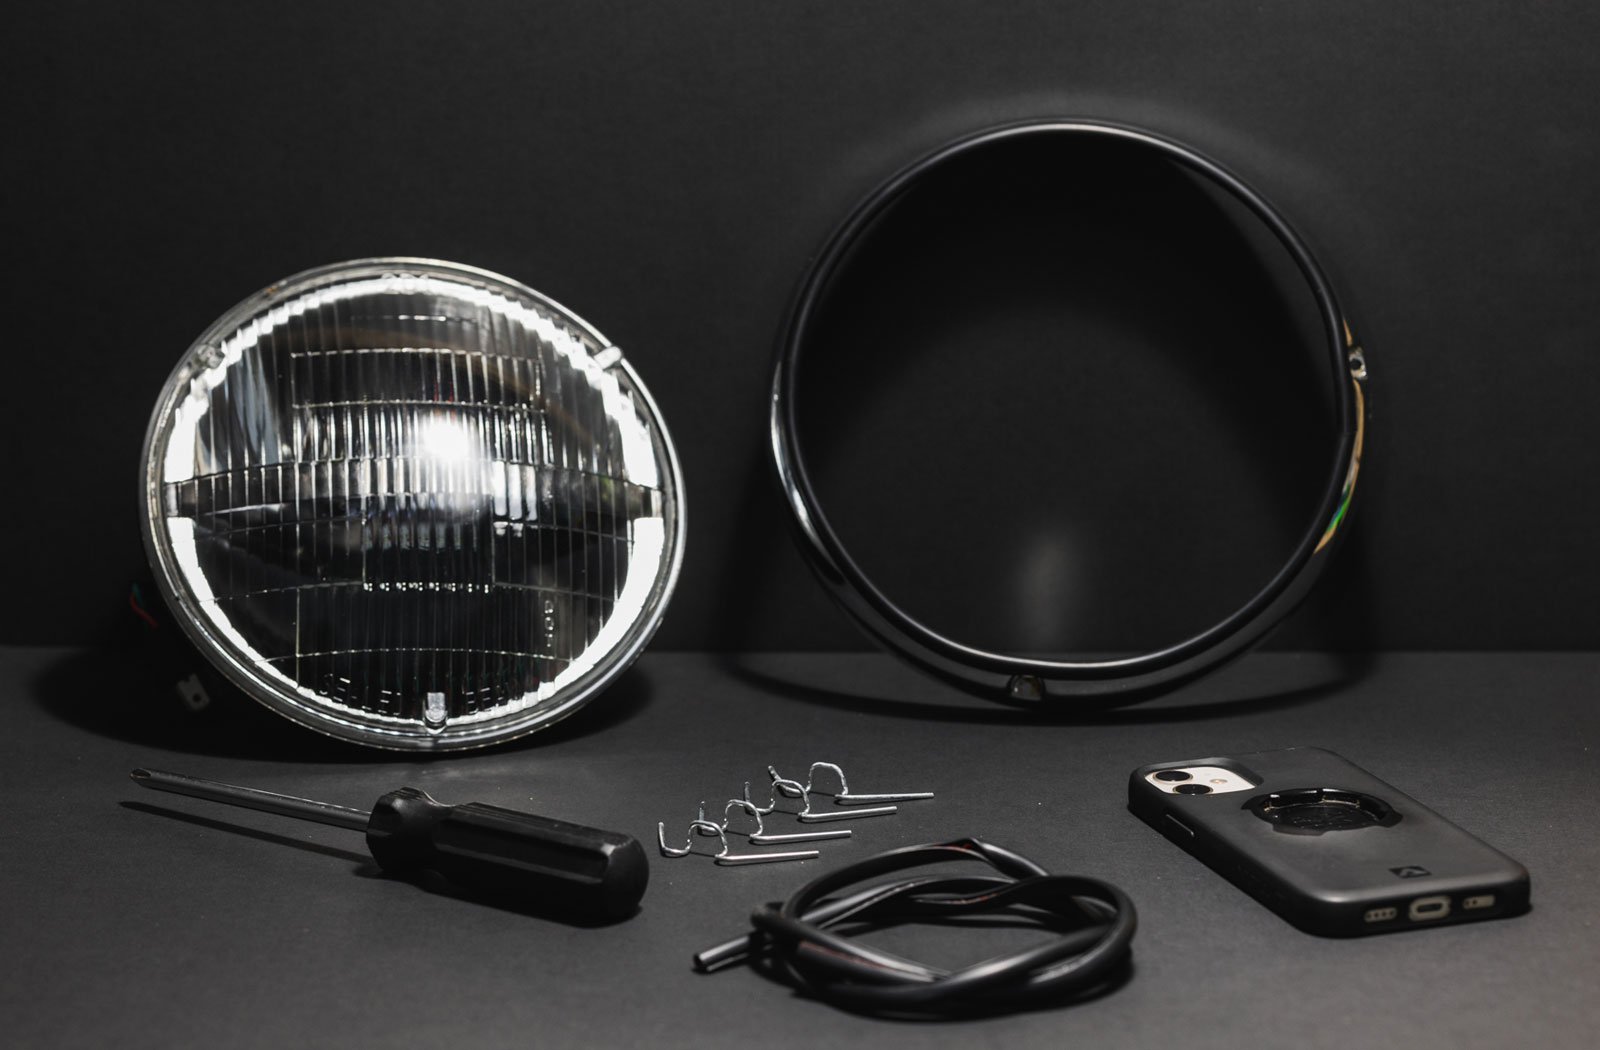 Revival Cycles retro LED 7 headlight review